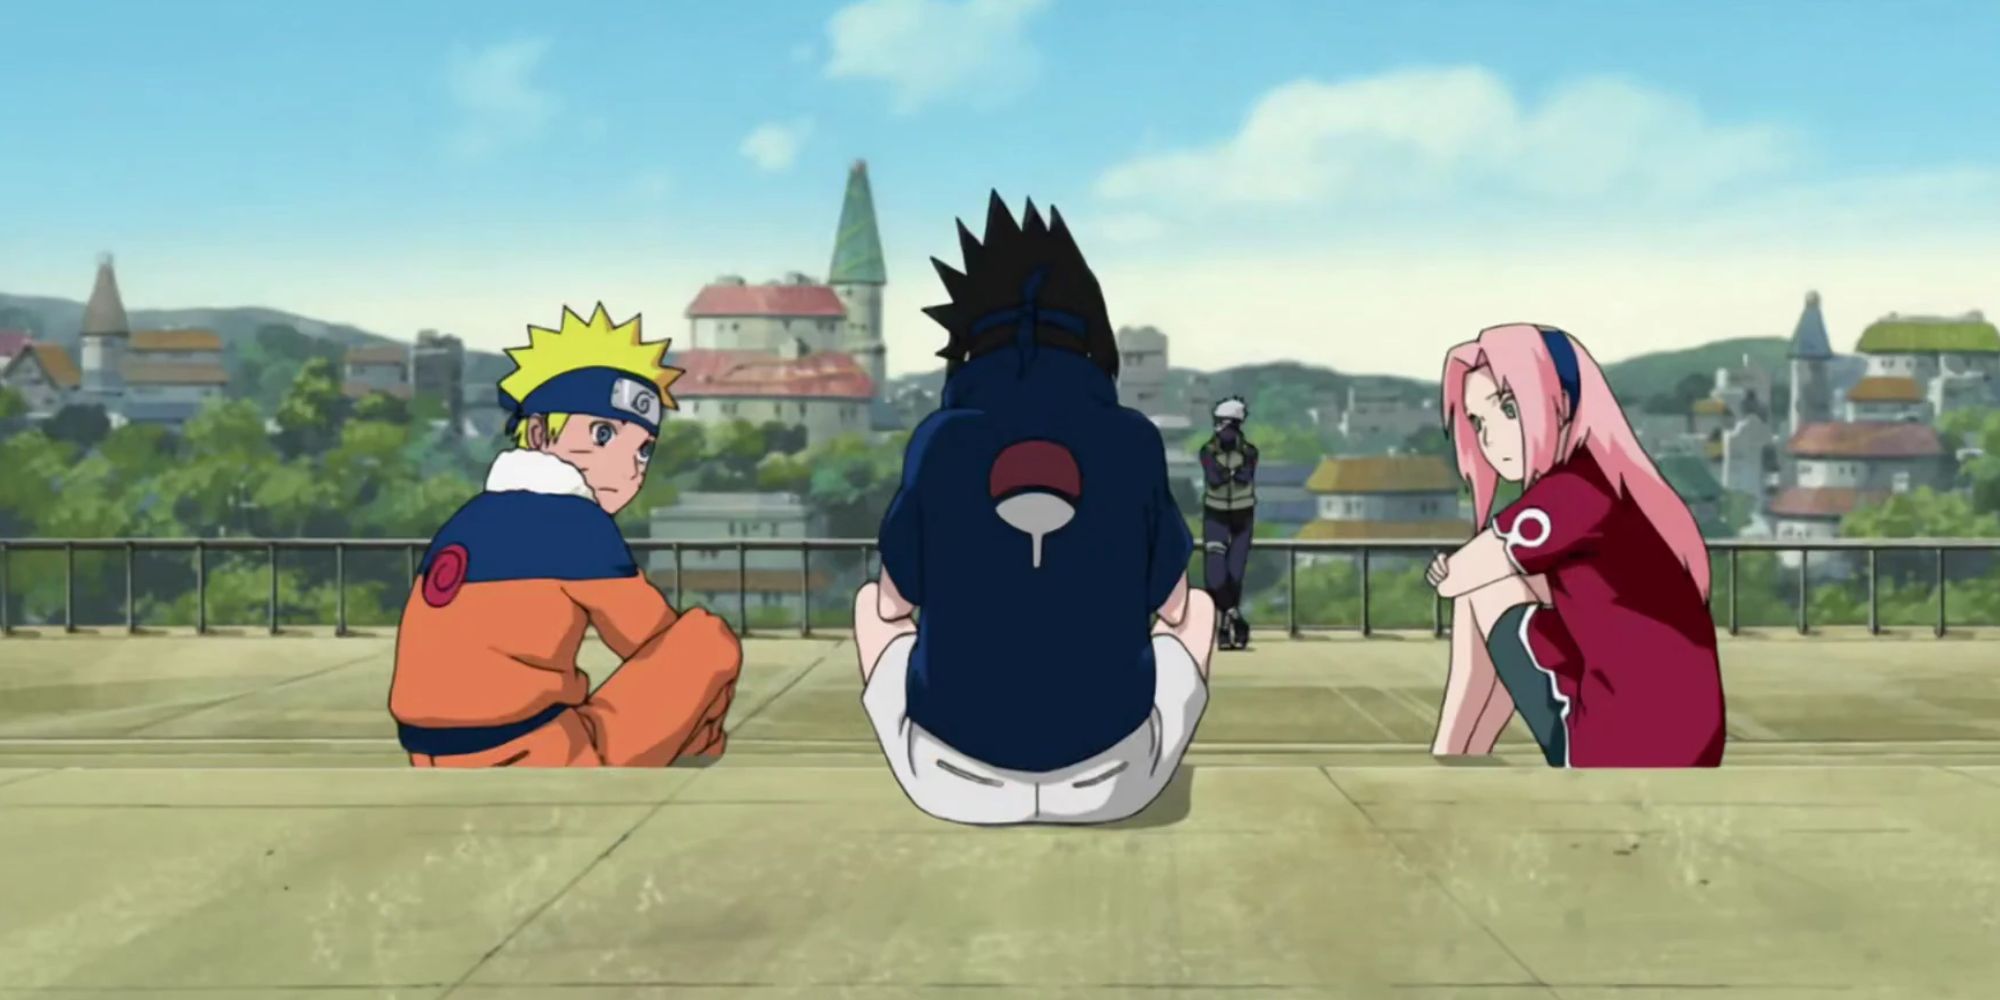 New Naruto 4-Episode Anime Delayed to 'Increase Quality